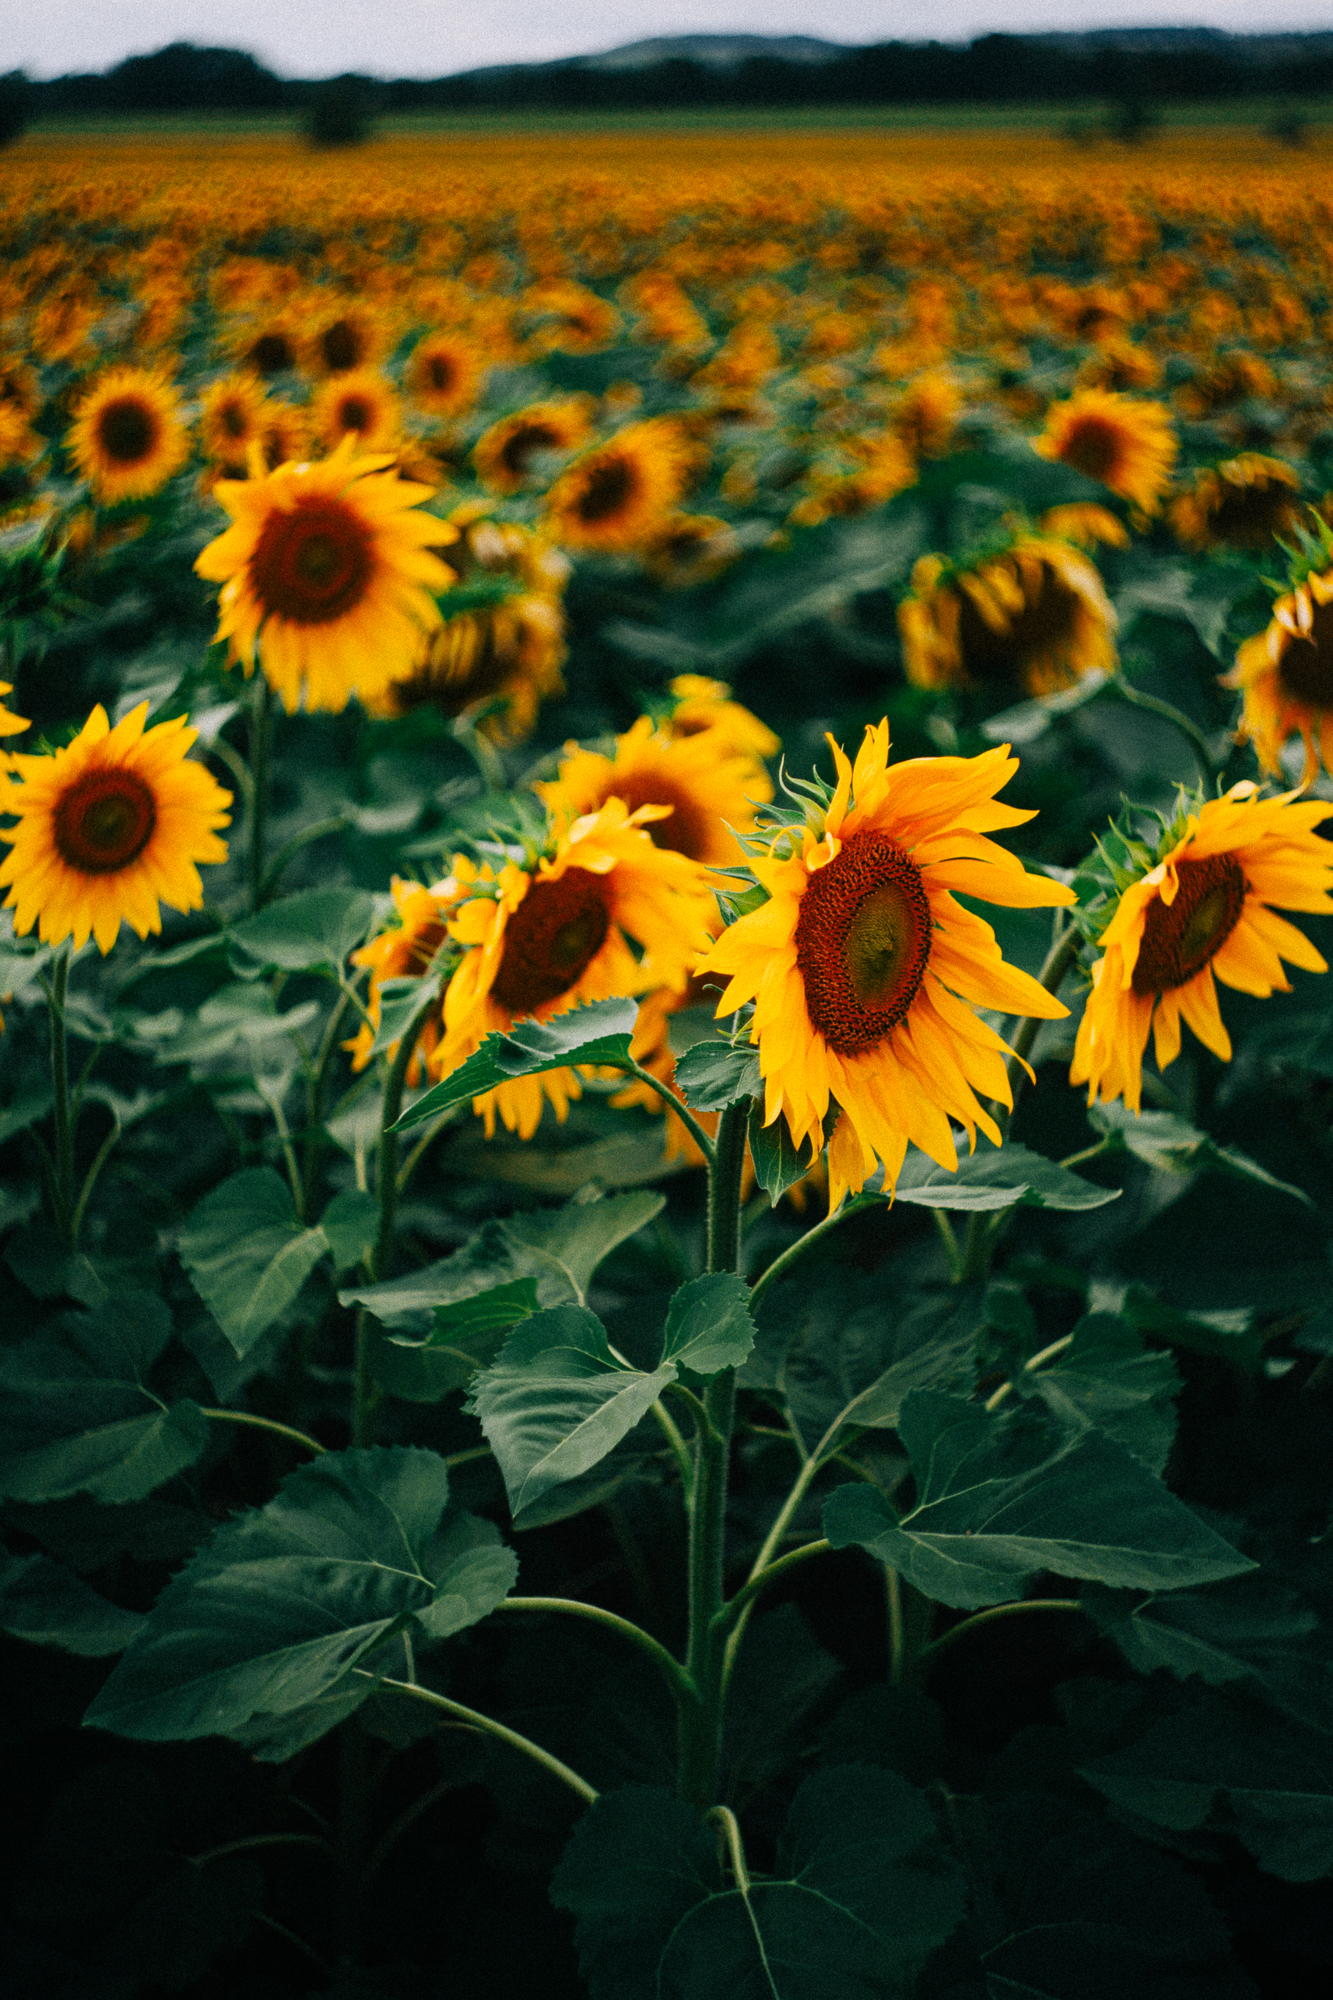 sunflowers together in summer